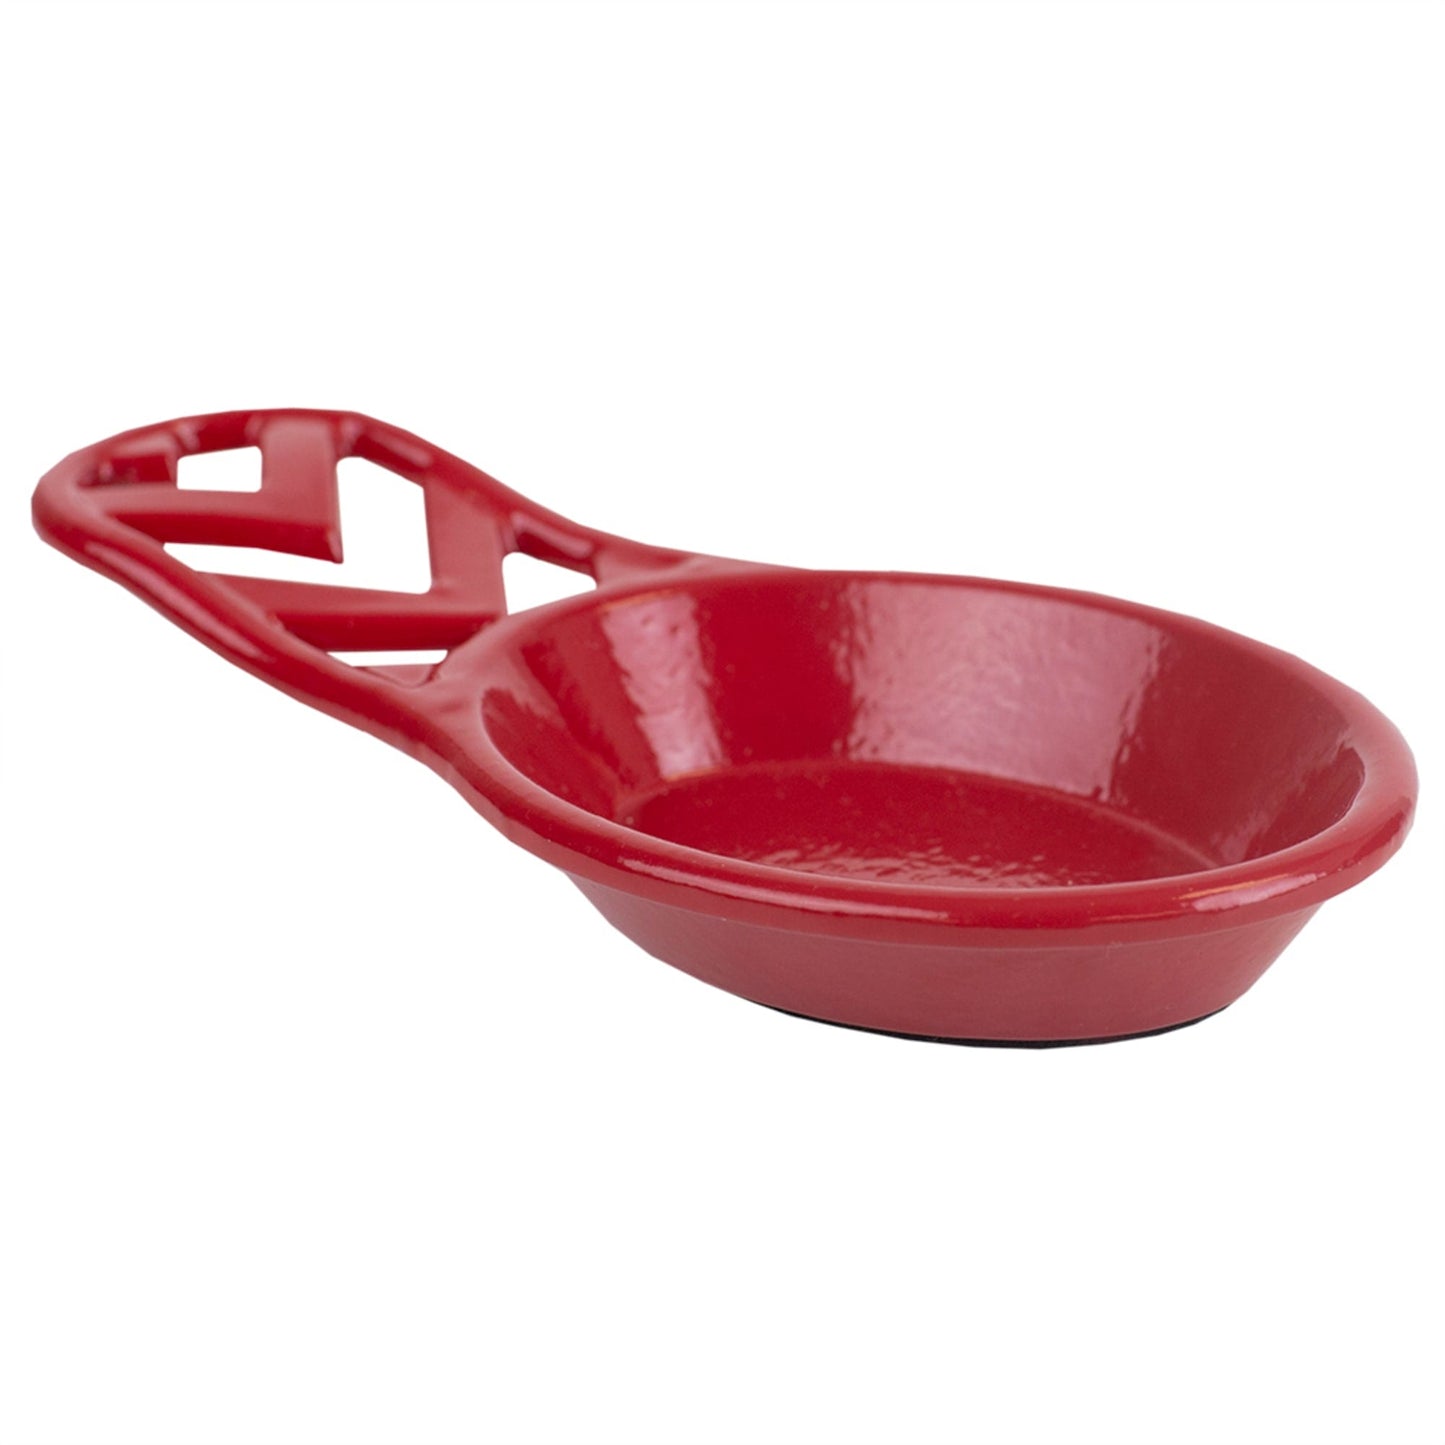 Chevron Collection Cast Iron Spoon Rest, Red